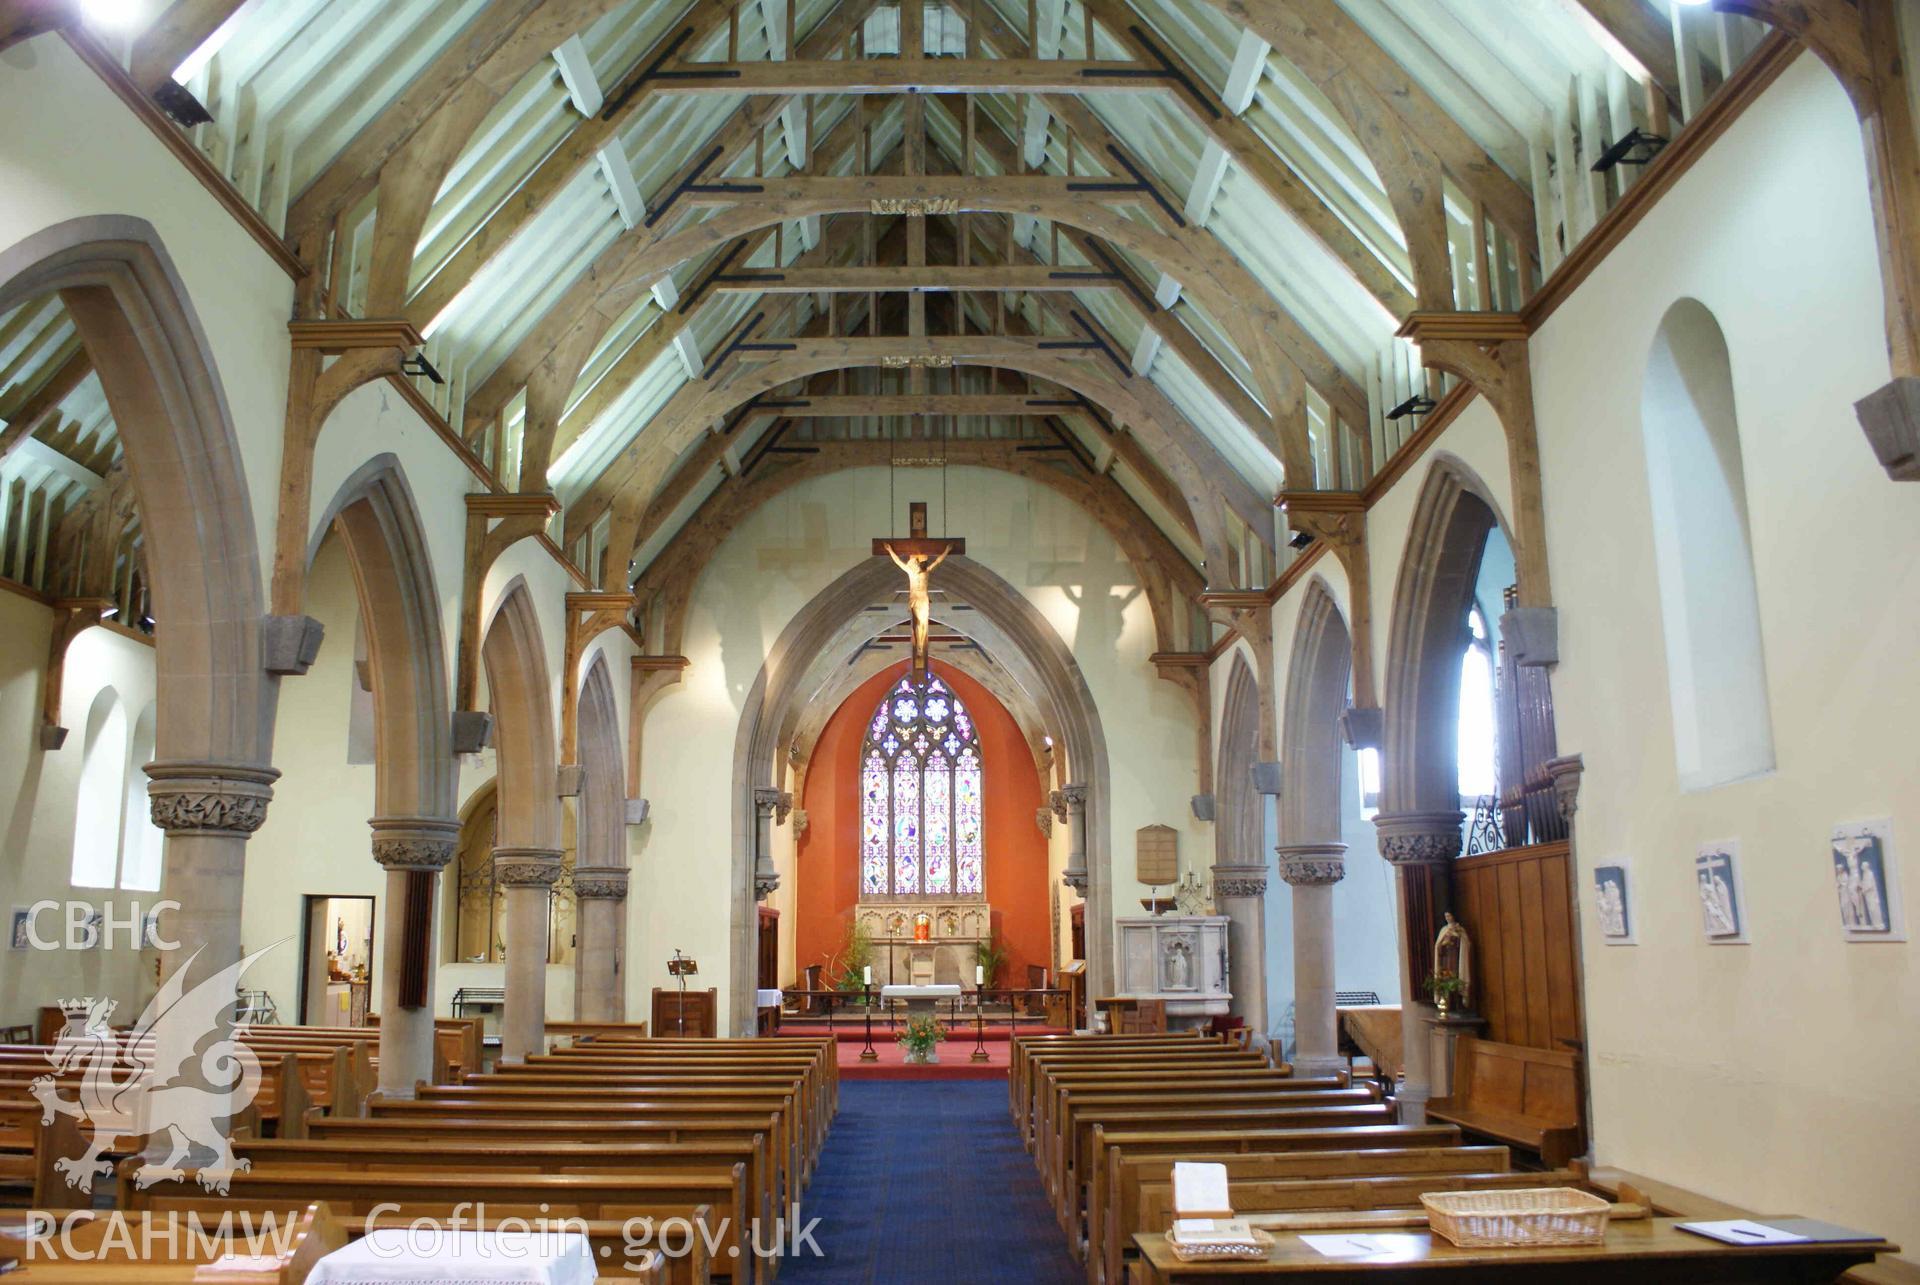 Digital colour photograph showing interior of Our Lady and St James Catholic church, Bangor.